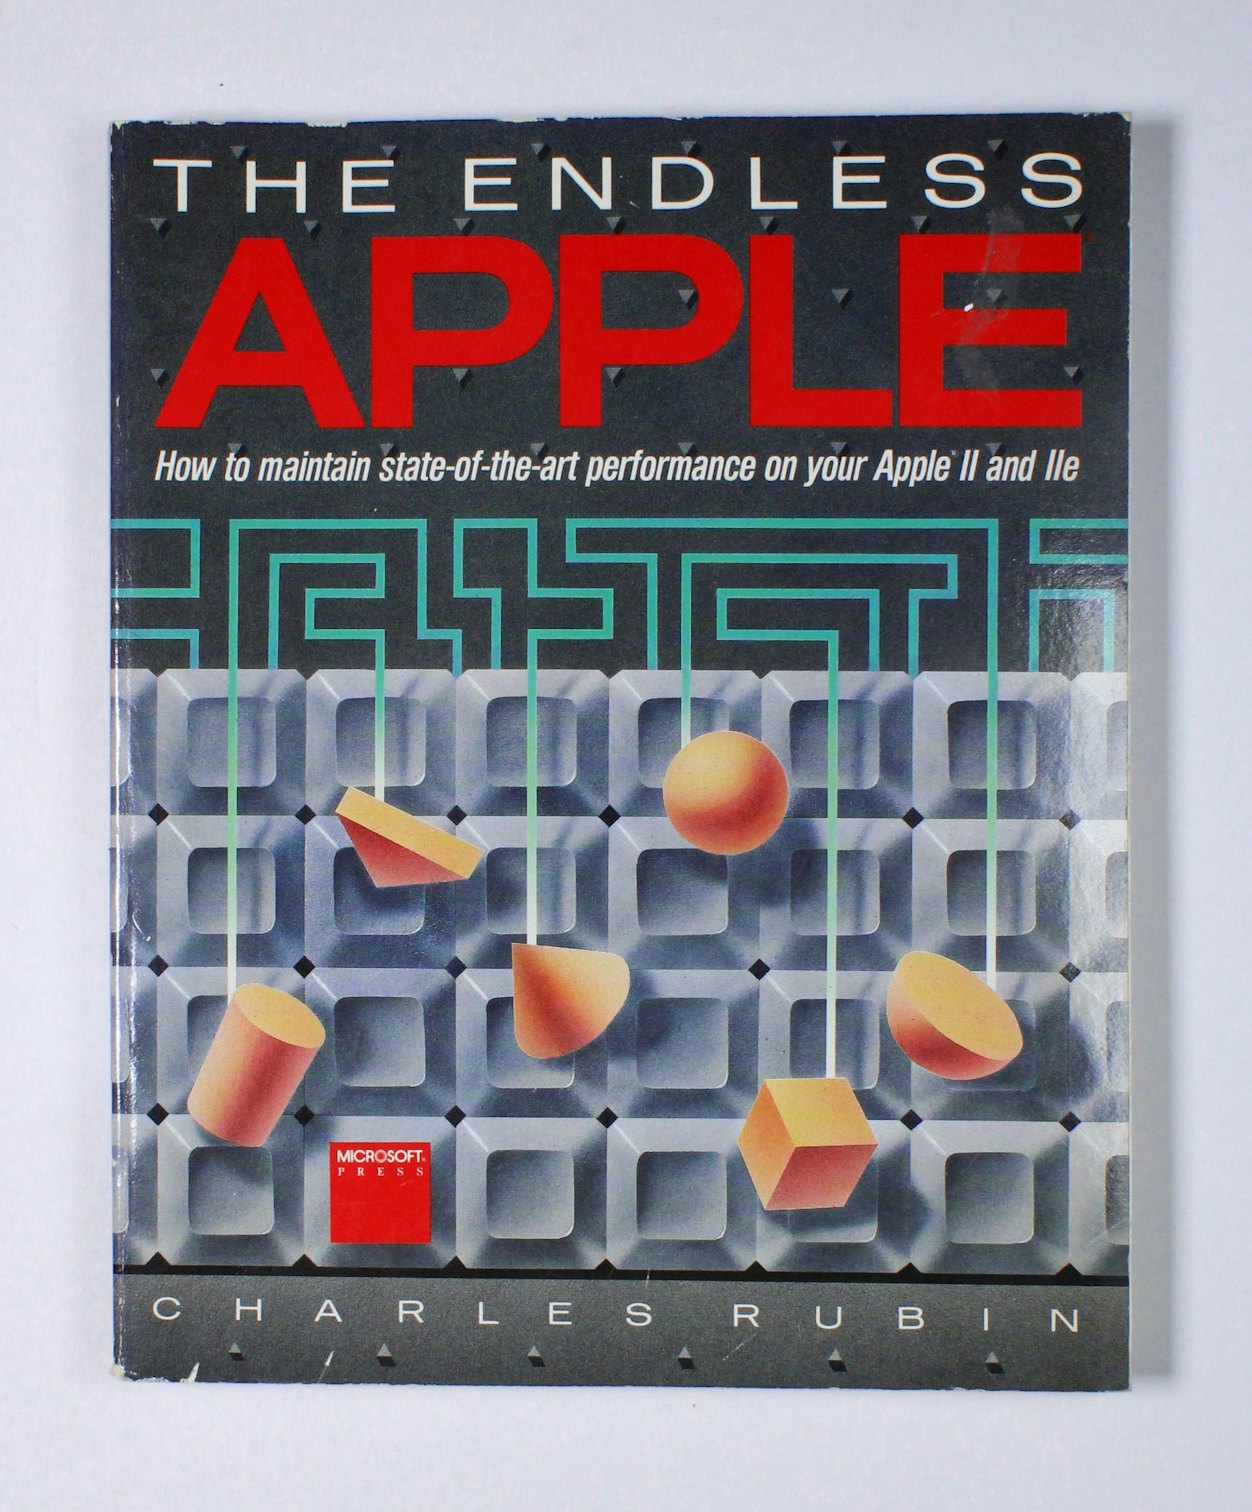 The Endless Apple